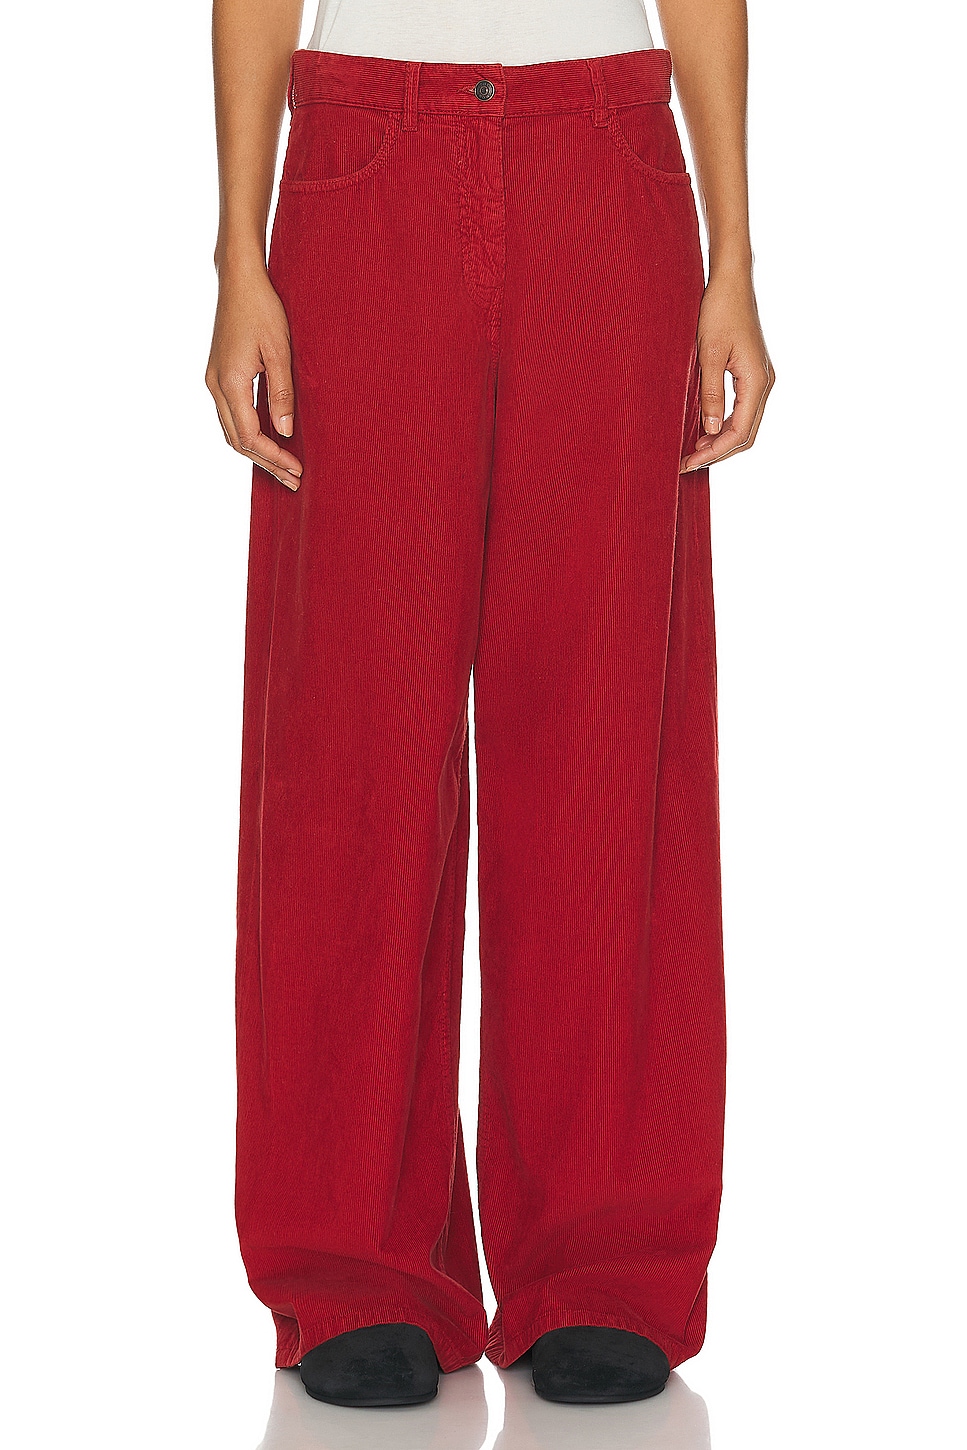 Image 1 of The Row Chan Pant in Red